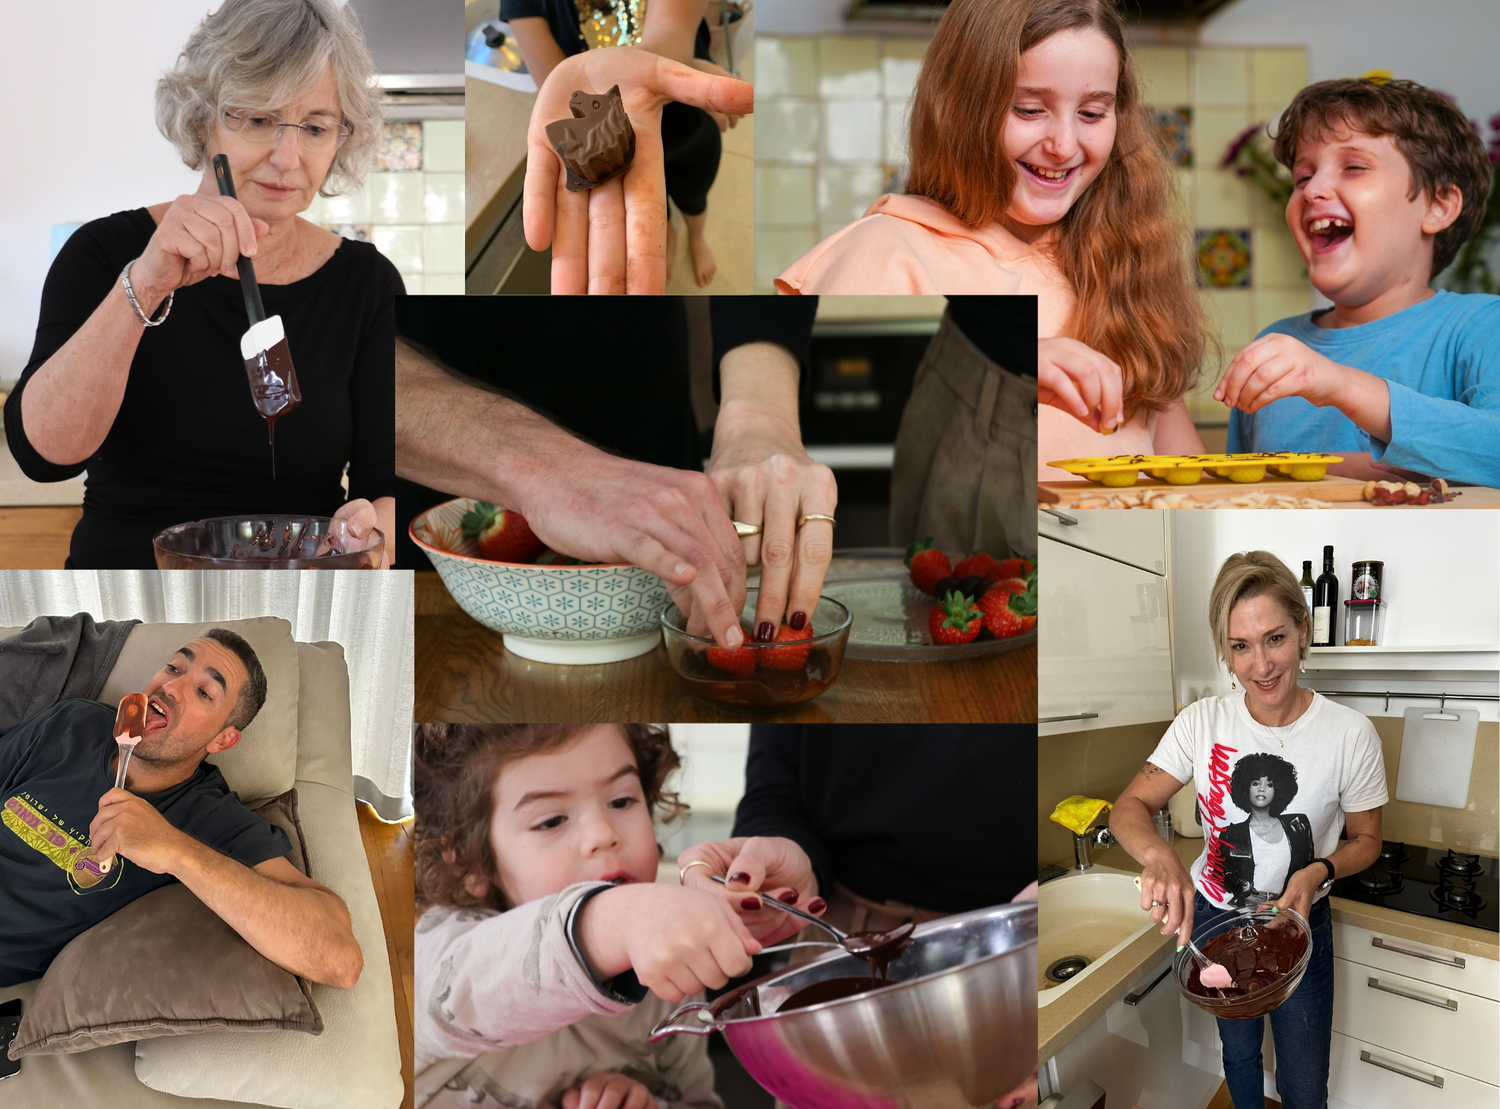 friends and families making chocolate together at their home kitchens